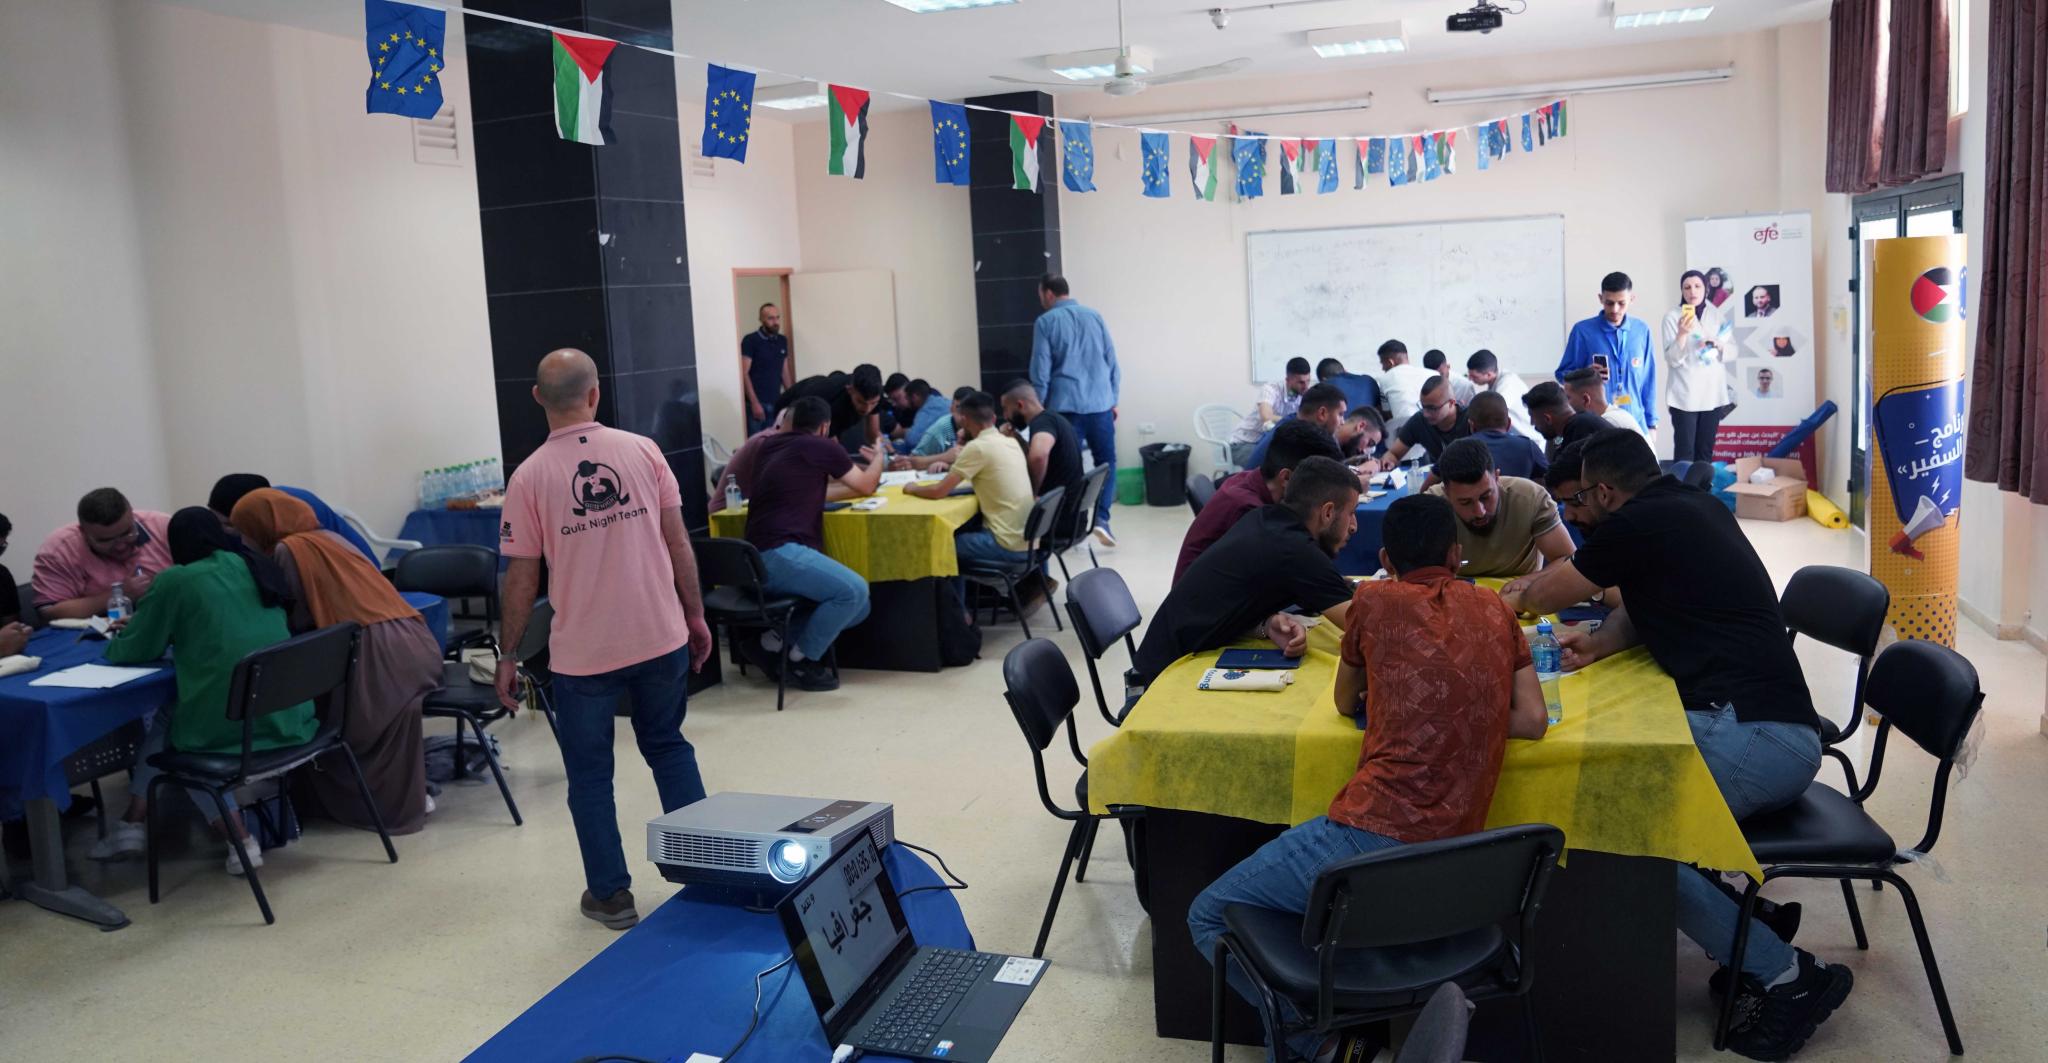 The University and the European Union Organize the "Quiz Night" Competition